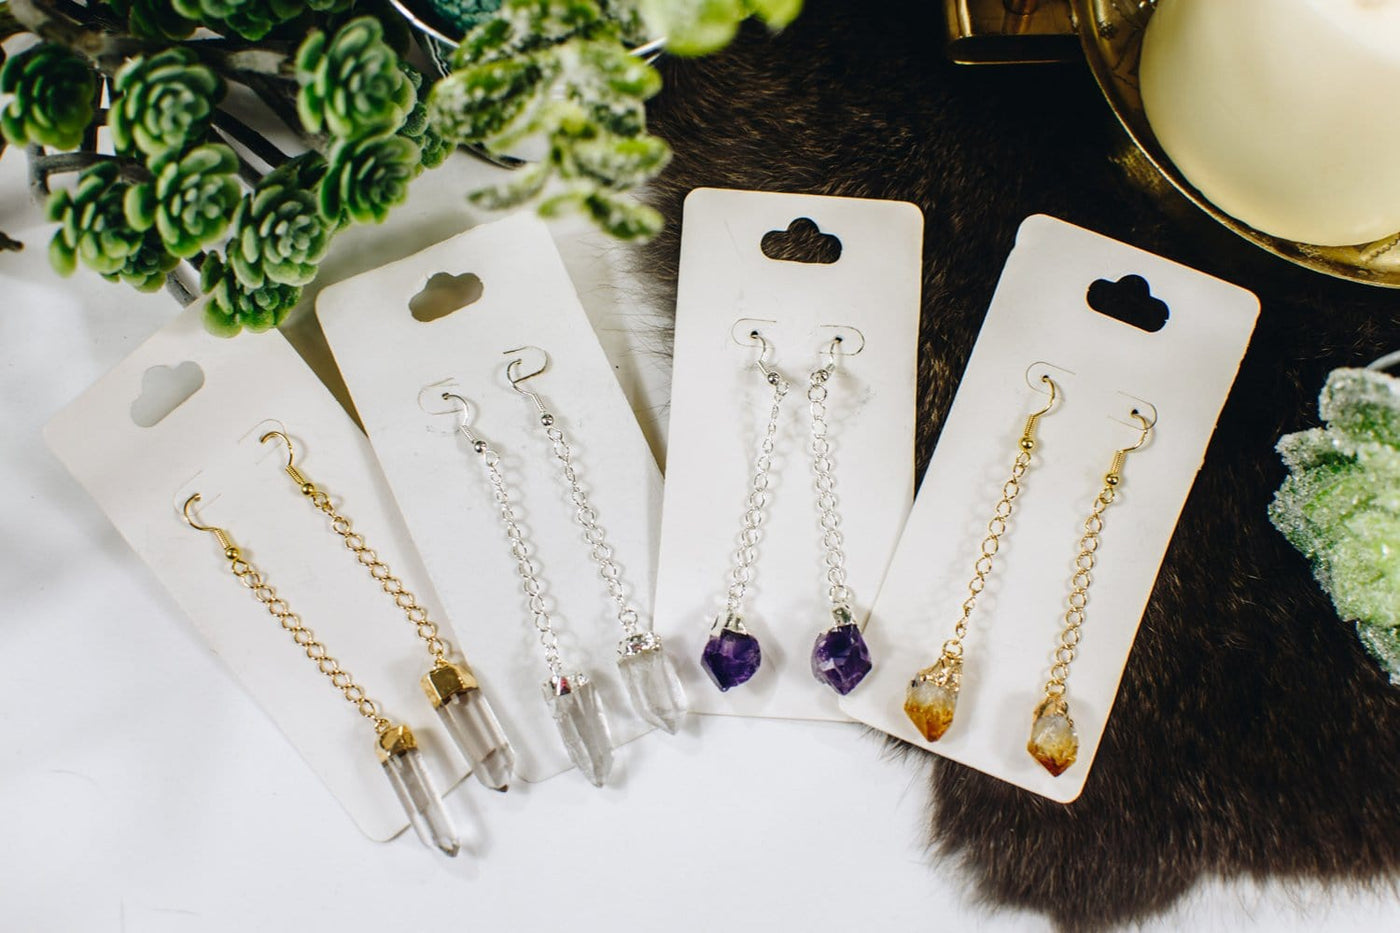 4 pairs of earring on white hang cards.  Each has crystals hanging from a chain that is approximately 2 inches long.  Pictured in order is crystal quartz point in gold, crystal quartz point in silver, amethyst points in silver, and citrine in gold.